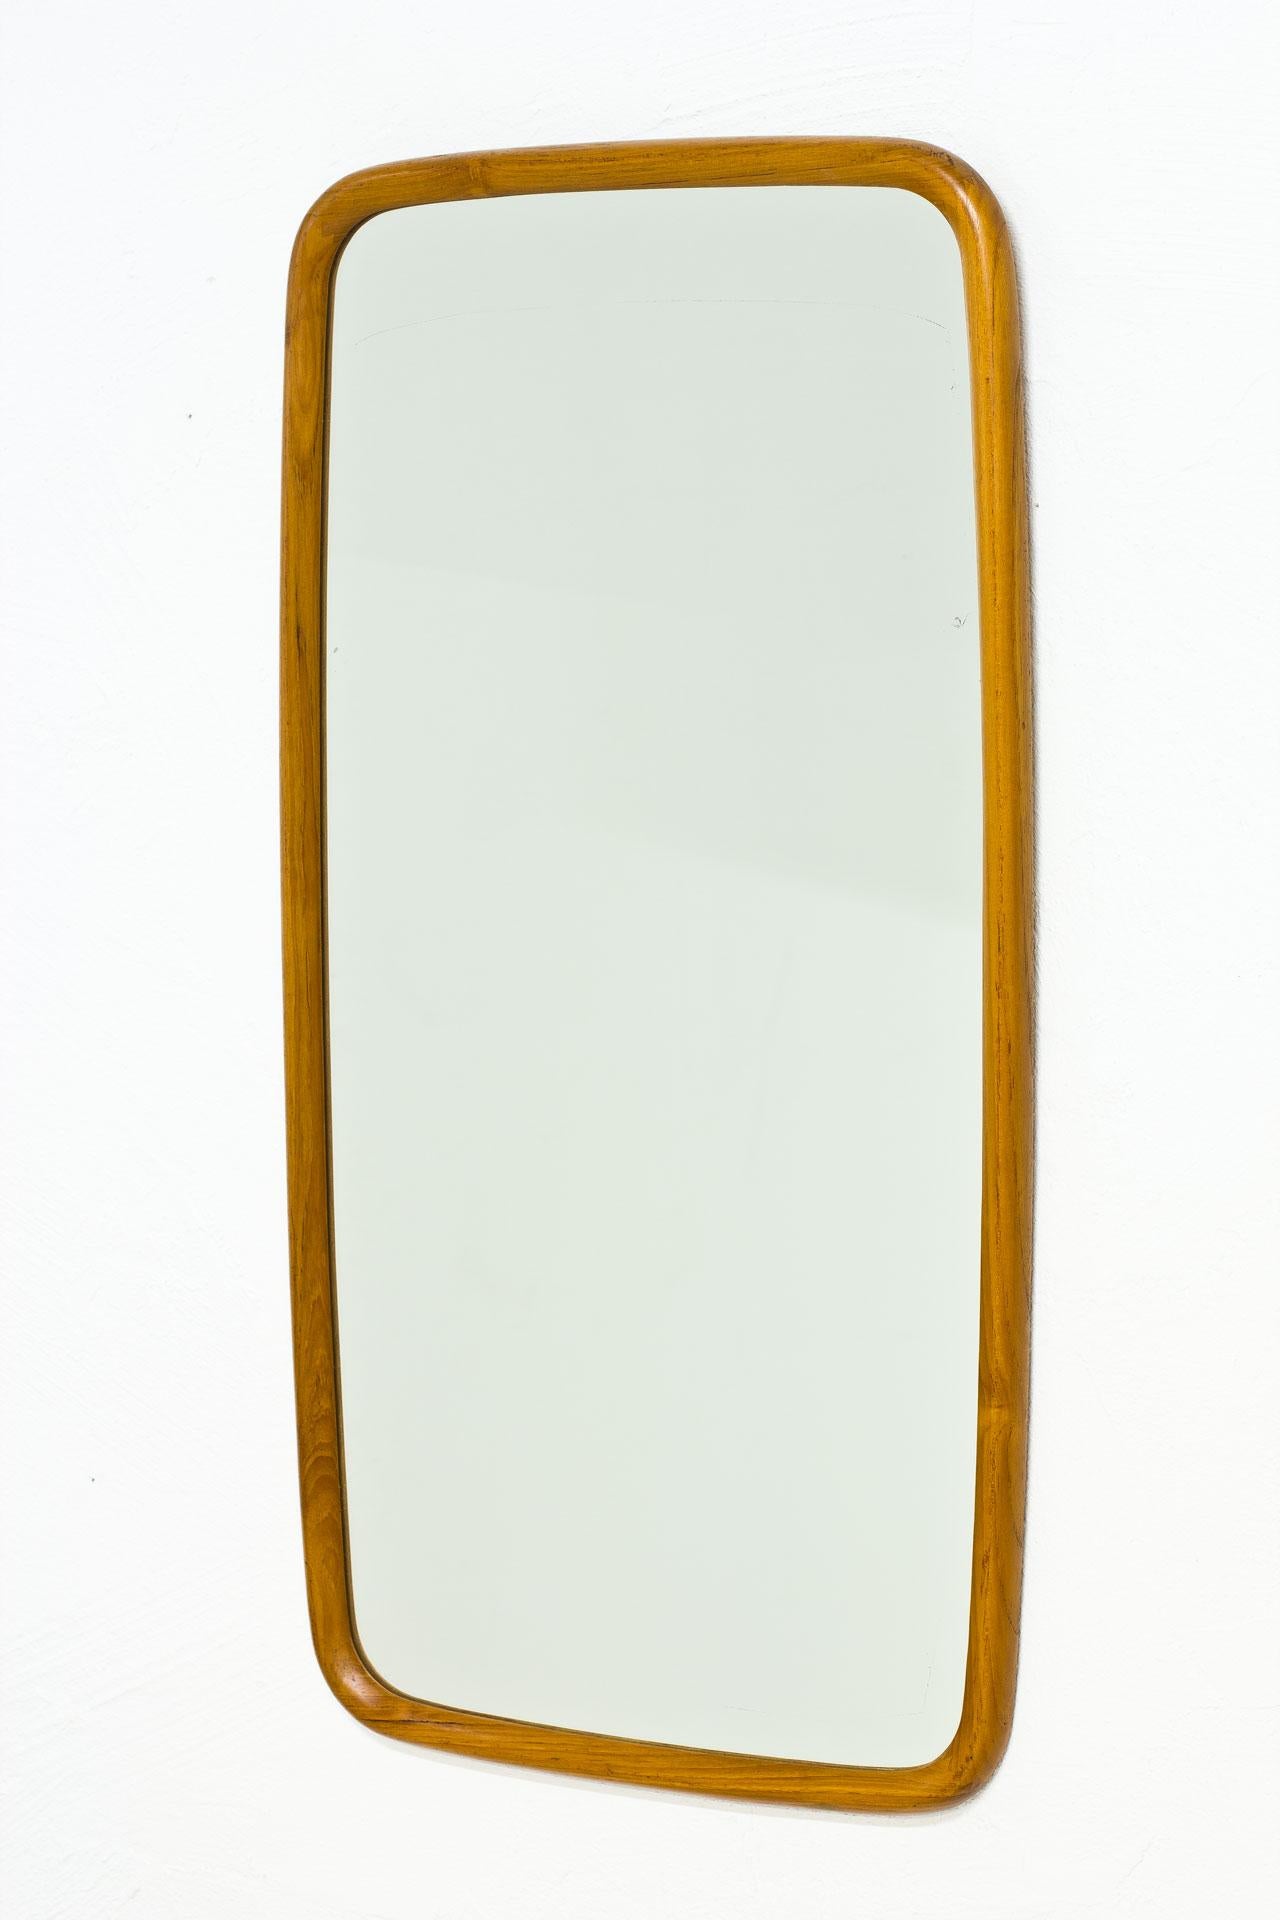 Oval shaped teak wall mirror manufactured by Fröseke AB Nybrofabriken during the
1950s in Sweden. Teak frame.